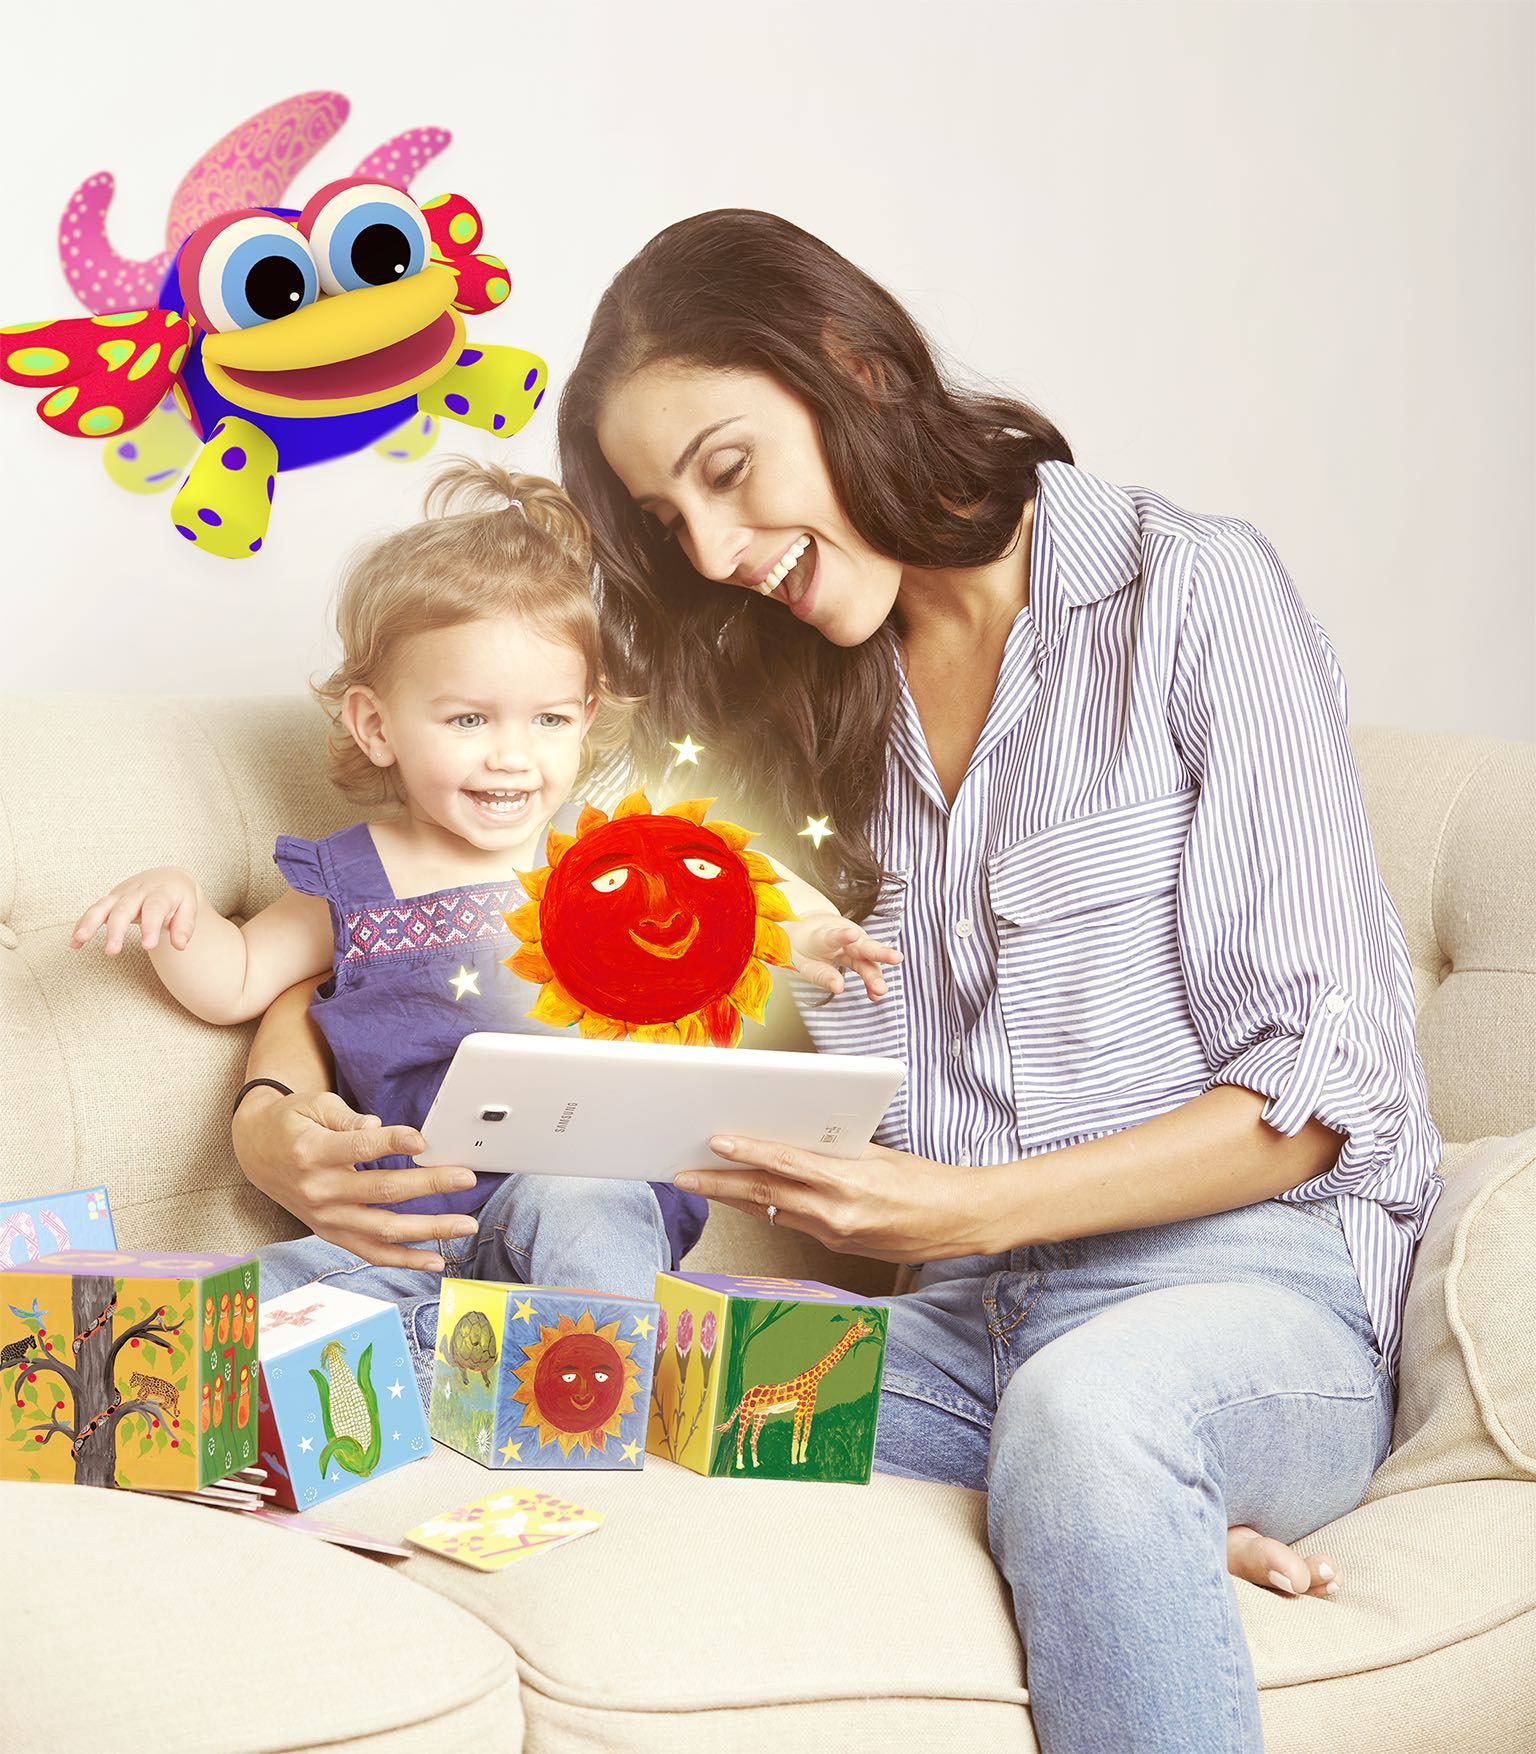 When interacting with the apps Boxart helps children developed cognitive skills.